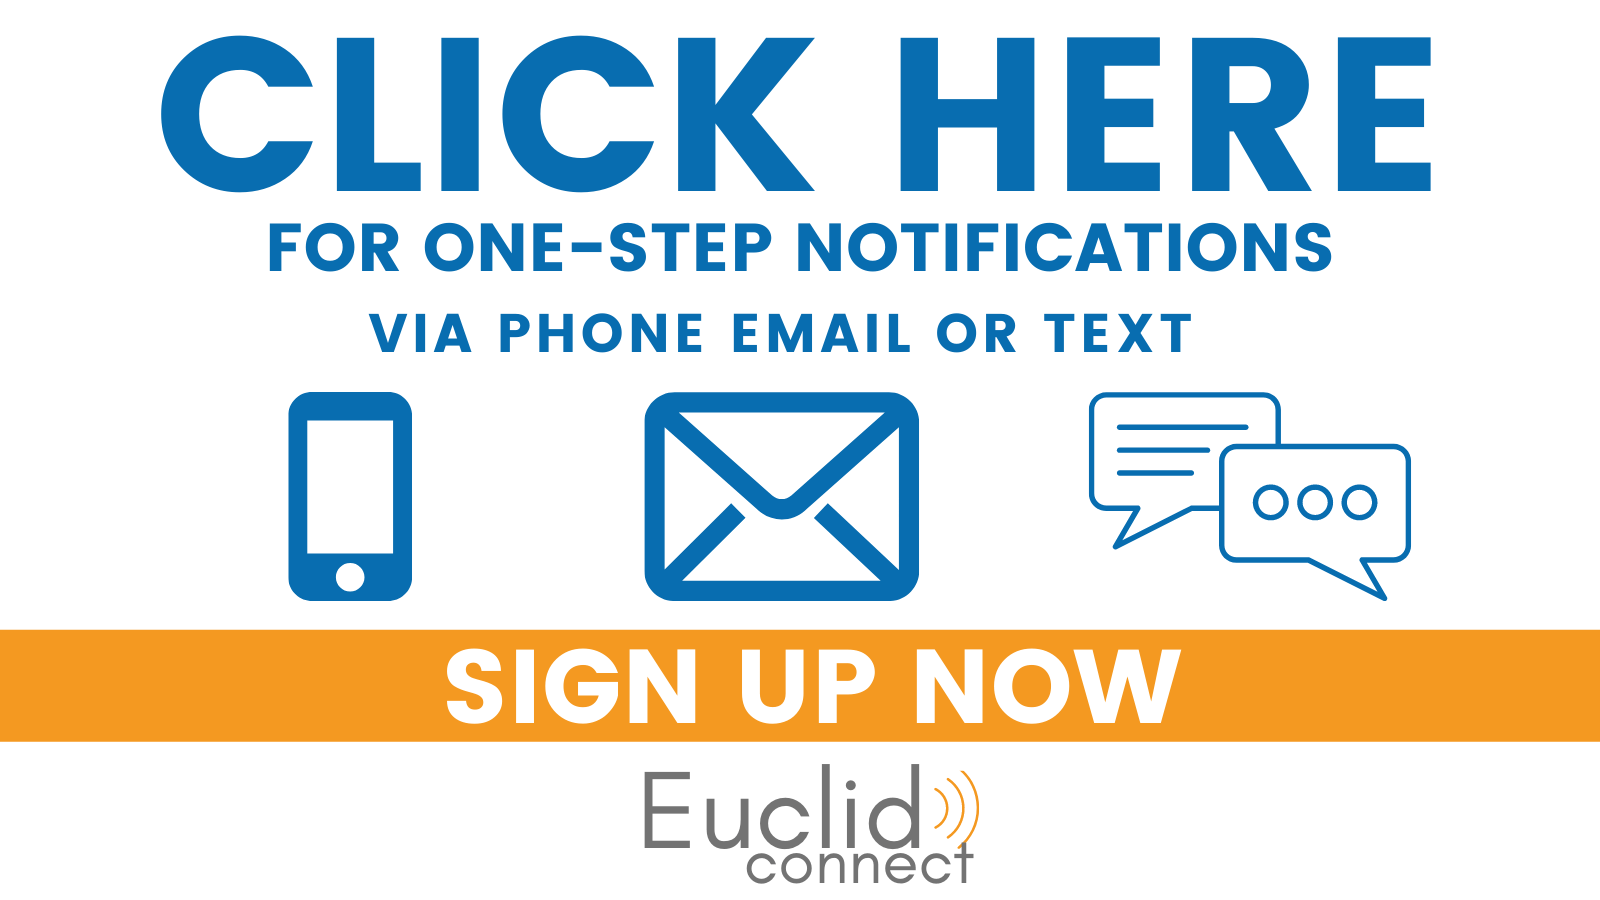 Click Here for one-step Notification by email, phone, text and more. Sign Up for Euclid Connect